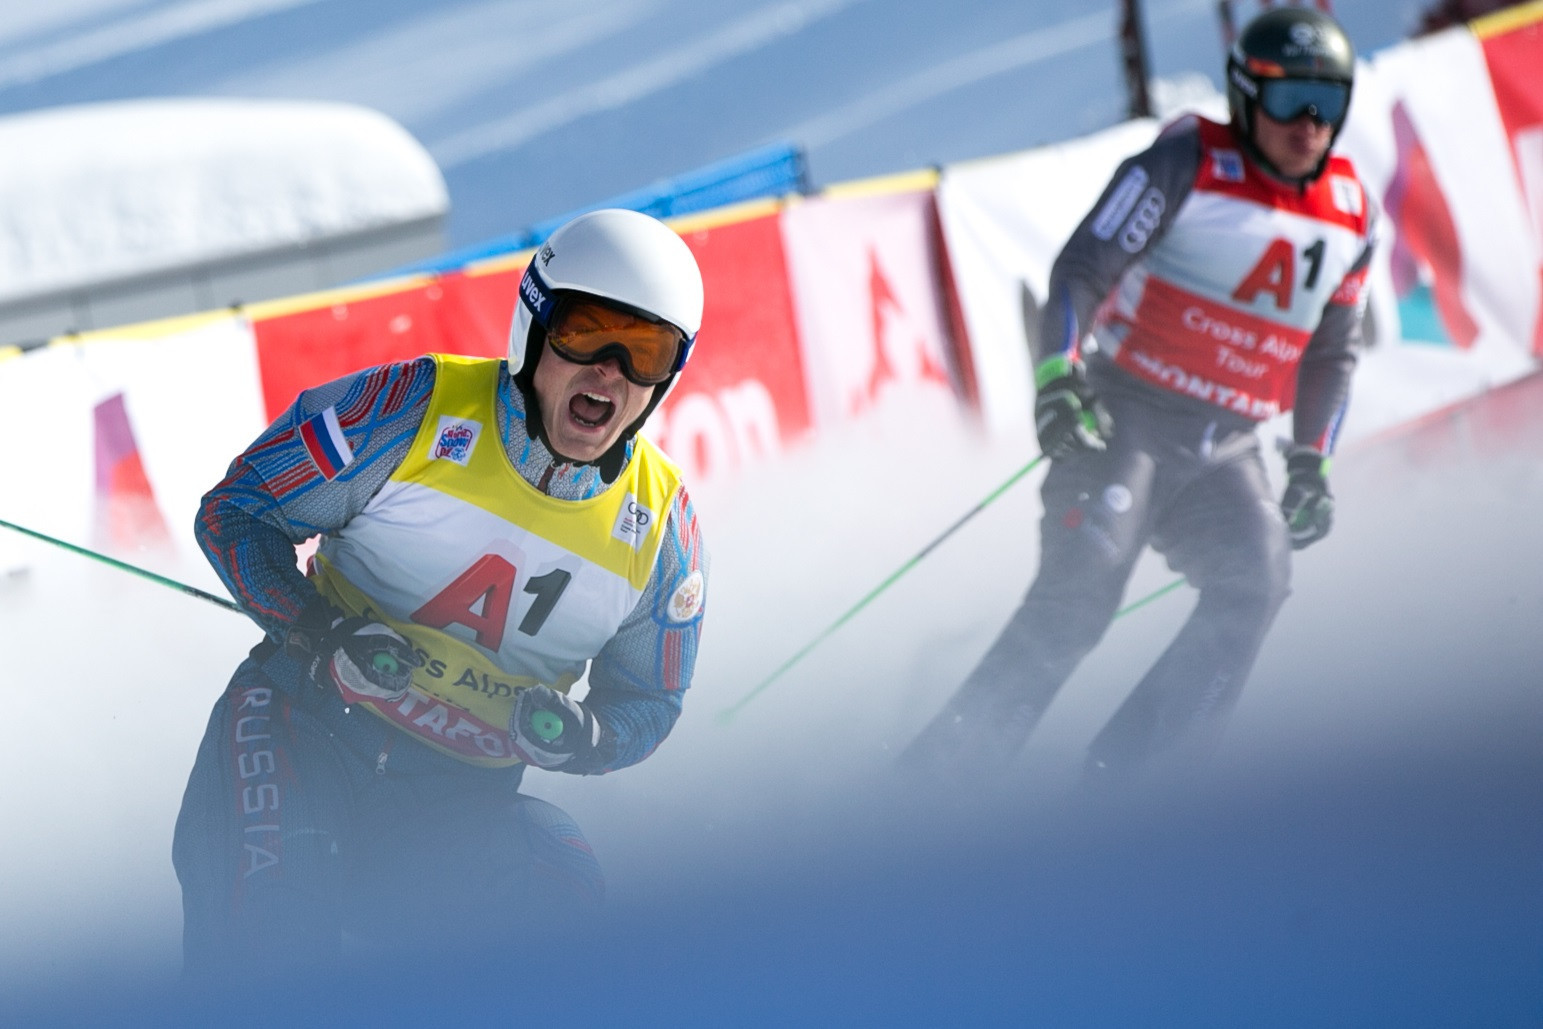 Ridzik and Smith taste victory at FIS Ski Cross World Cup in Montafon